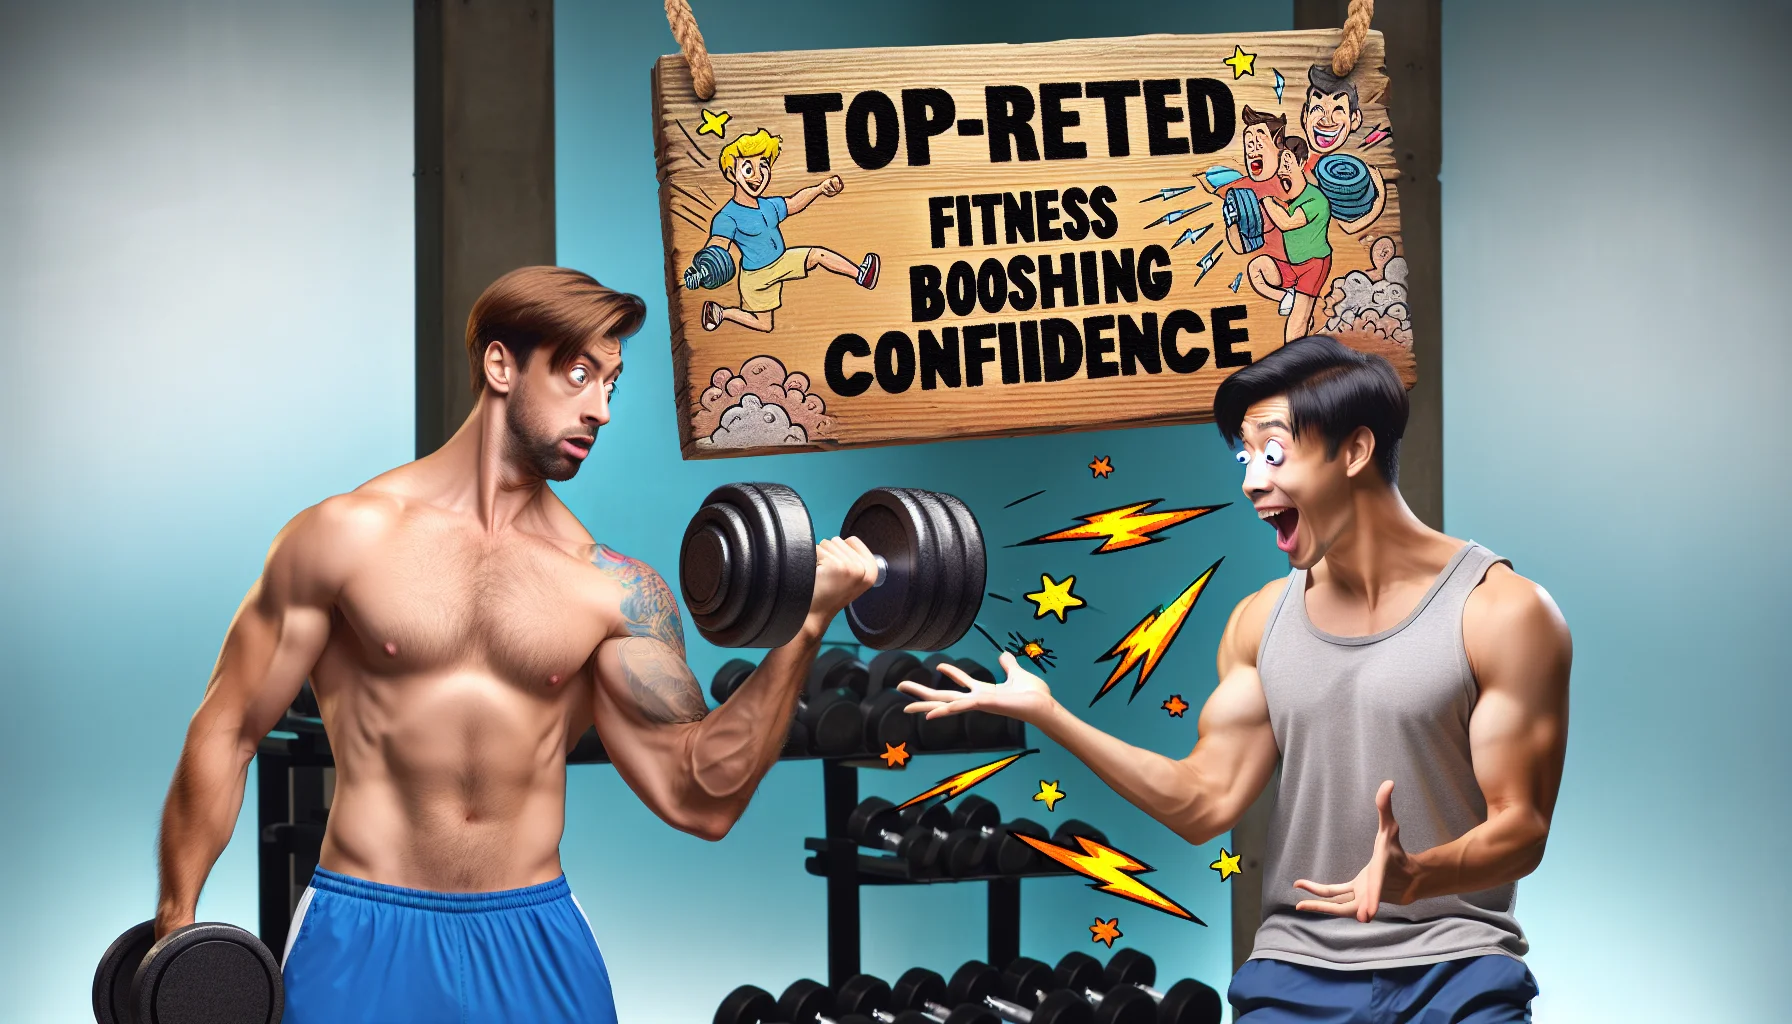 Create a humorous image representing the idea of male enhancement in terms of fitness and confidence. In this image, portray an energetic, Caucasian male effortlessly lifting huge dumbbells while wearing gym gear. Next to him, depict a surprised, Asian male cheerfully struggling with smaller dumbbells. Write the text overlay 'Top-Rated Fitness Boosting Confidence' carving into a wooden signboard hovering overhead with cartoonish designs that depict energy and activity. Both men exhibit a healthy rivalry and camaraderie evoking an atmosphere that entices people to exercise.